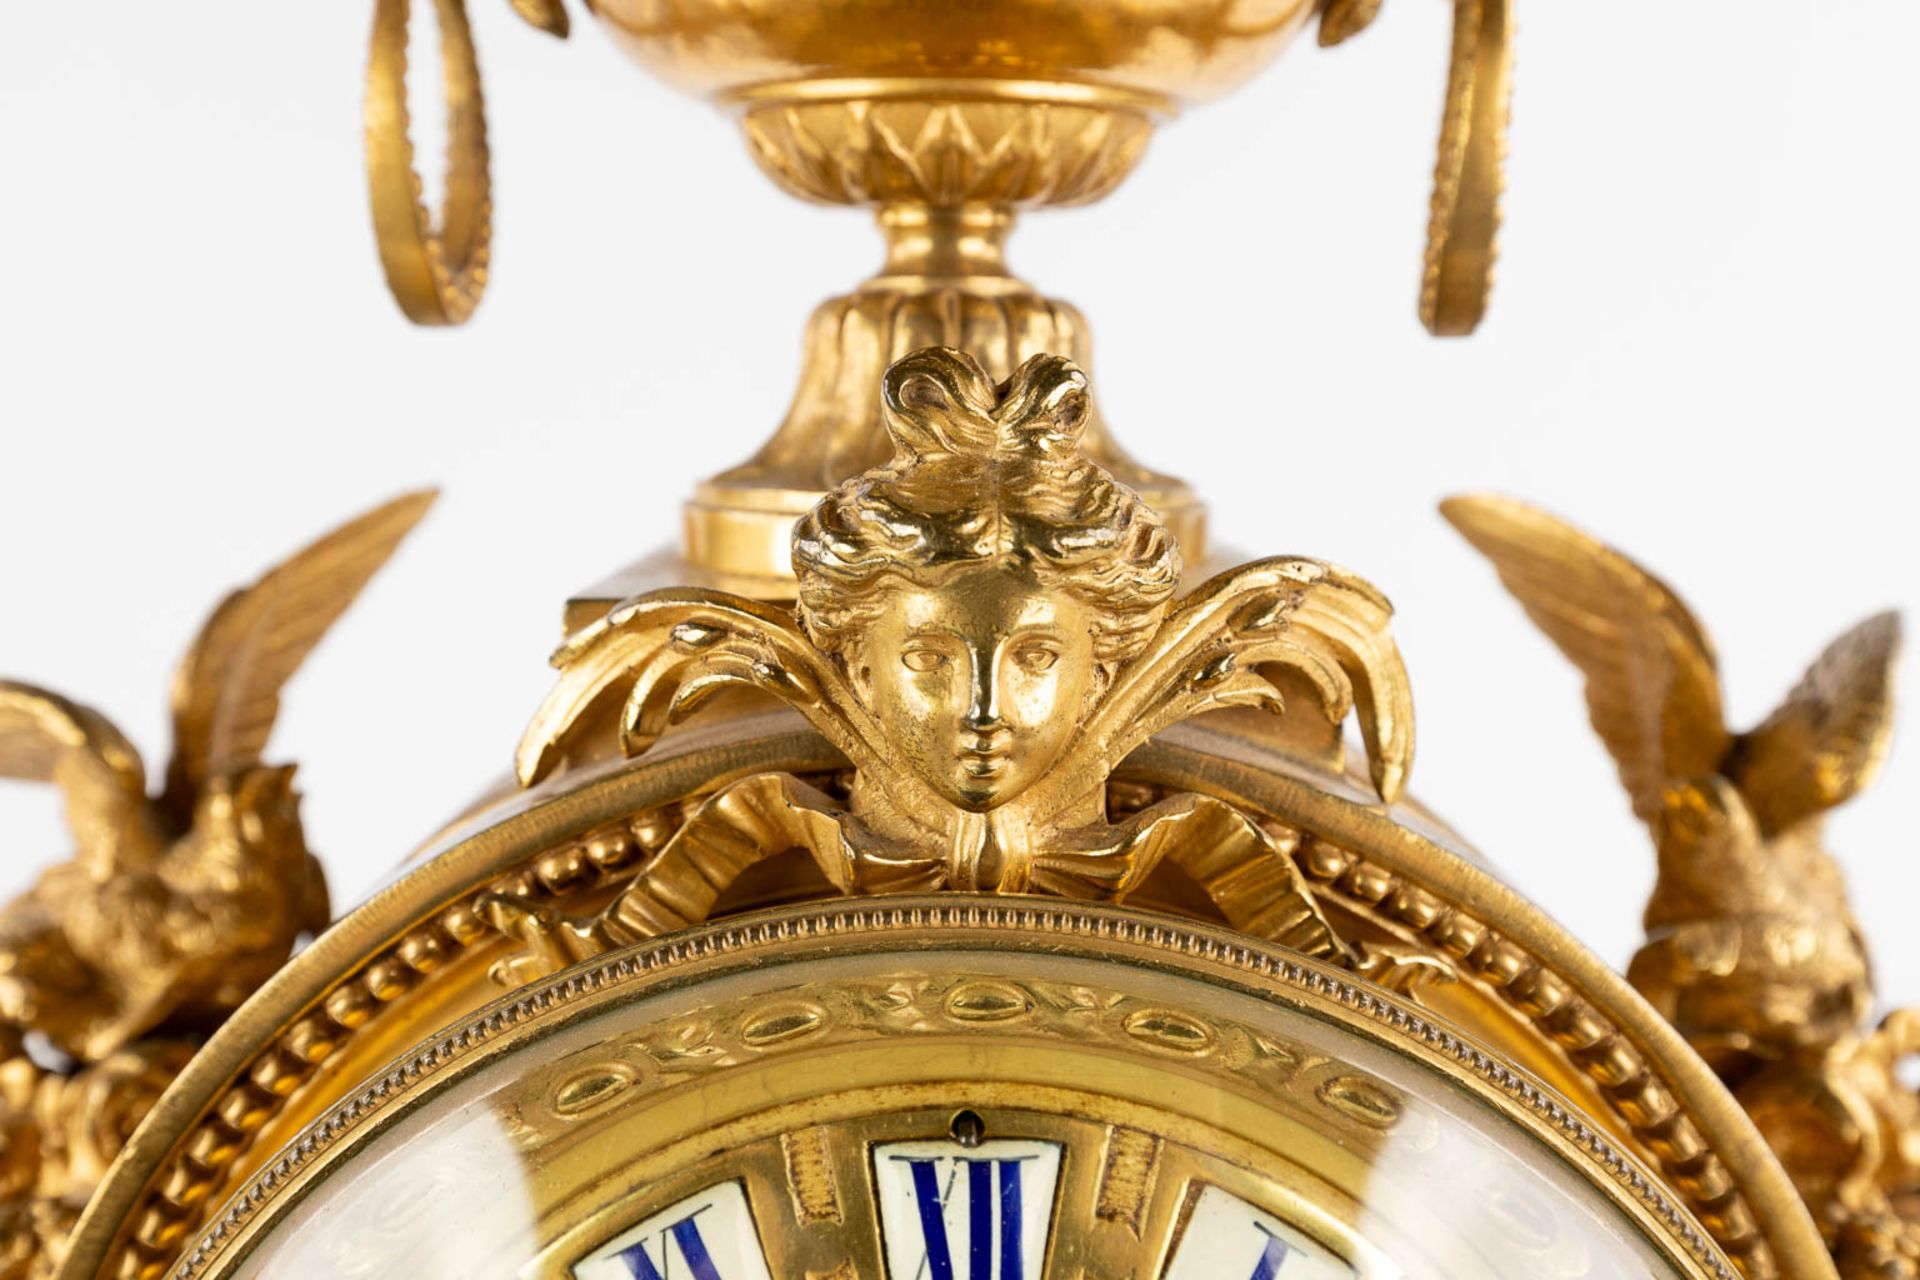 A three-piece mantle garniture clock and candelabra, gilt bronze in a Louis XVI style, 19th C. (D:19 - Image 14 of 19